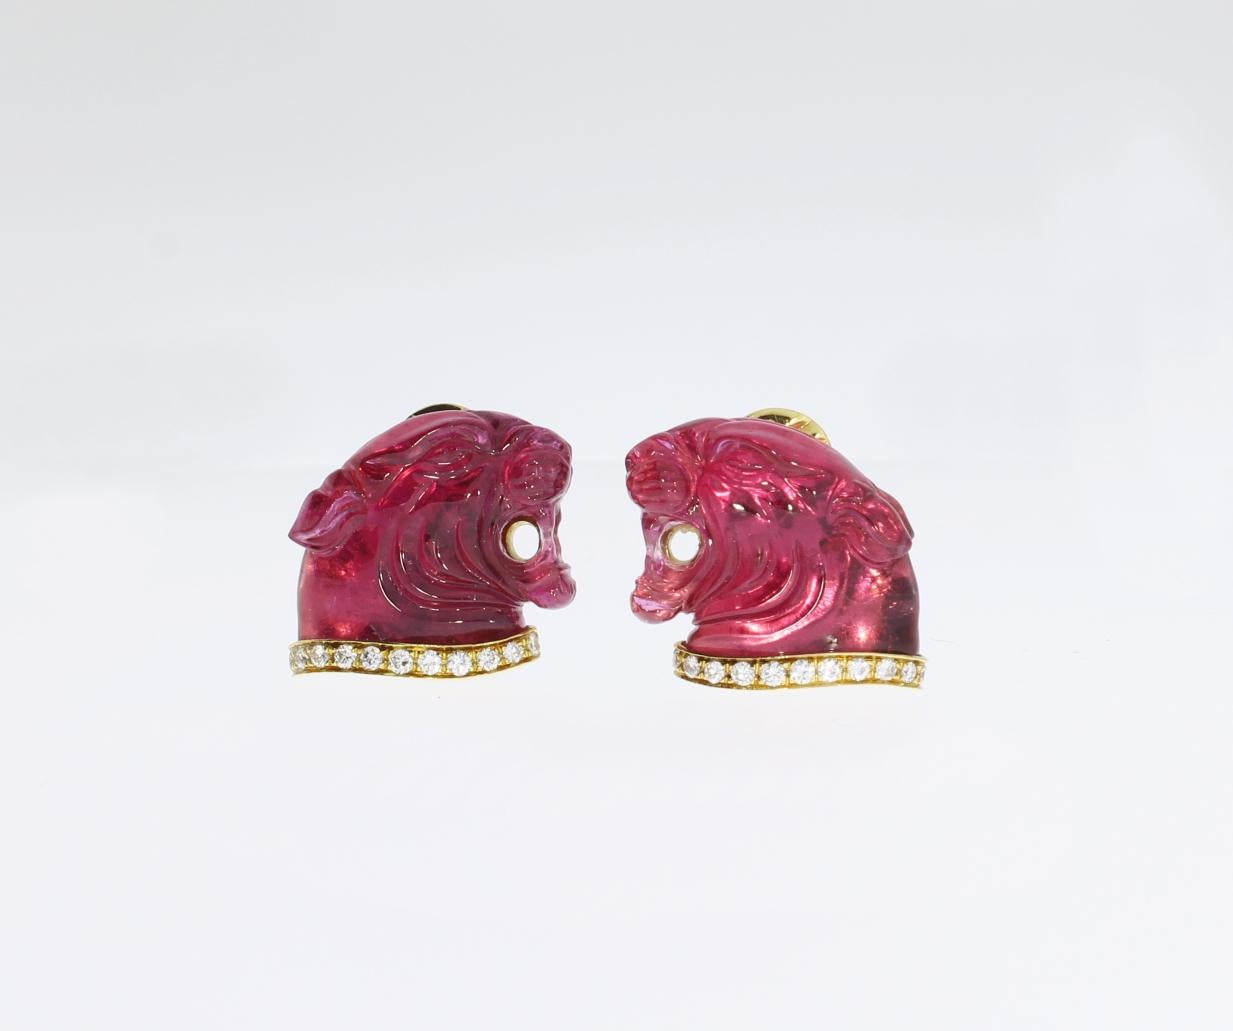 Italy, 1970's. Panther head in pink tourmaline carved. Diamond collar with 22 brilliant-cut diamonds 
with a total weight of ca. 1,8 ct. Mounted in 18 K yellow gold. Marked with the purity 750, Star 869 AL on the back. Weight: 23,22 grams.